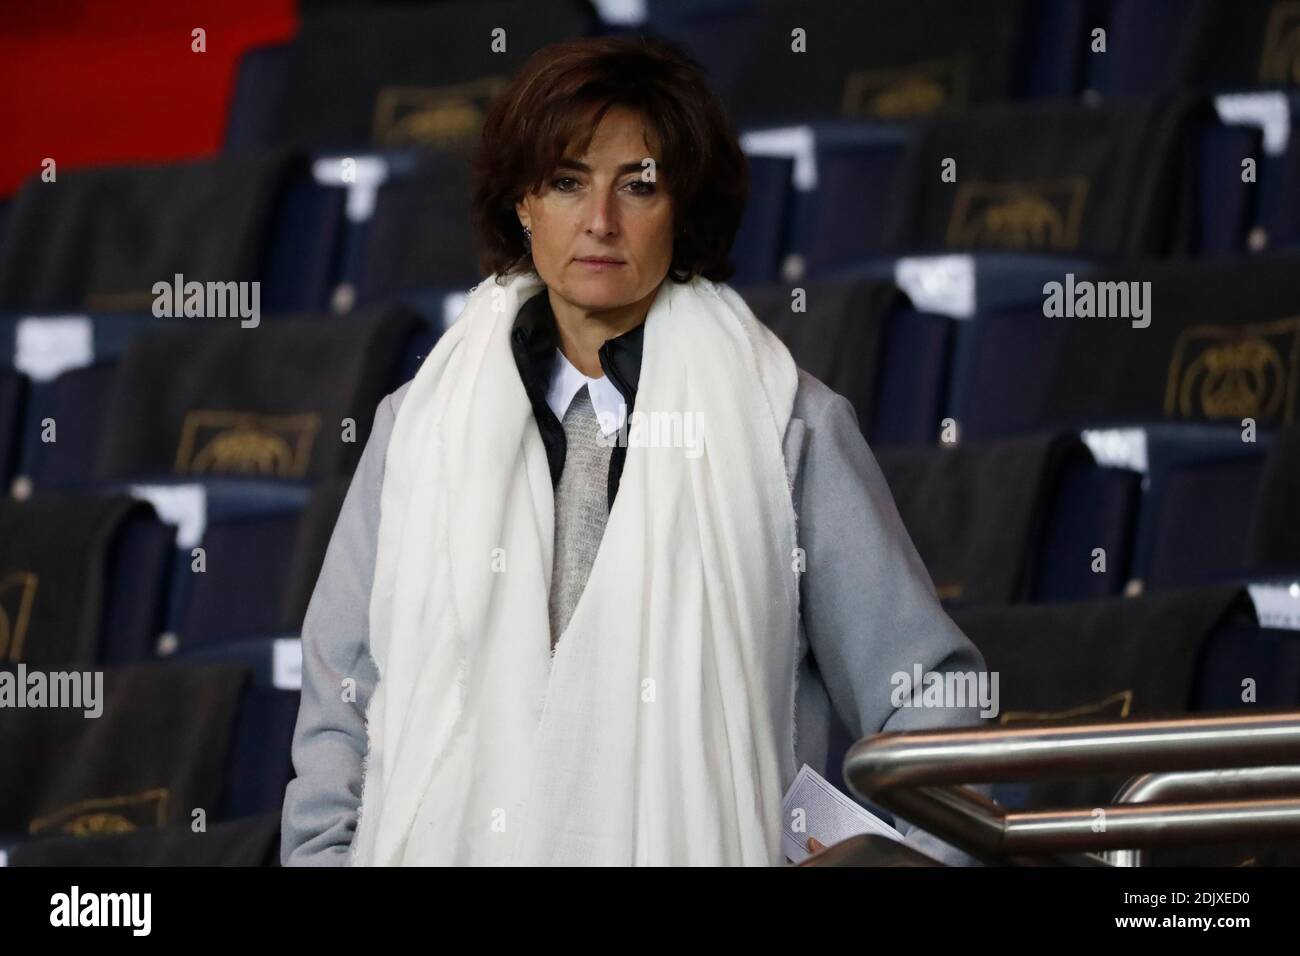 Nathalie Iannetta,UEFA Chief advisor and former special sports advisor of Francois Hollande during the Group stage-Group A match of the Champion's League, Paris-St-Germain vs Ludogorets in Parc des Princes, Paris, France, on December 6th, 2016. PSG and Ludogorets drew 2-2. Photo by Henri Szwarc/ABACAPRESS.COM Stock Photo